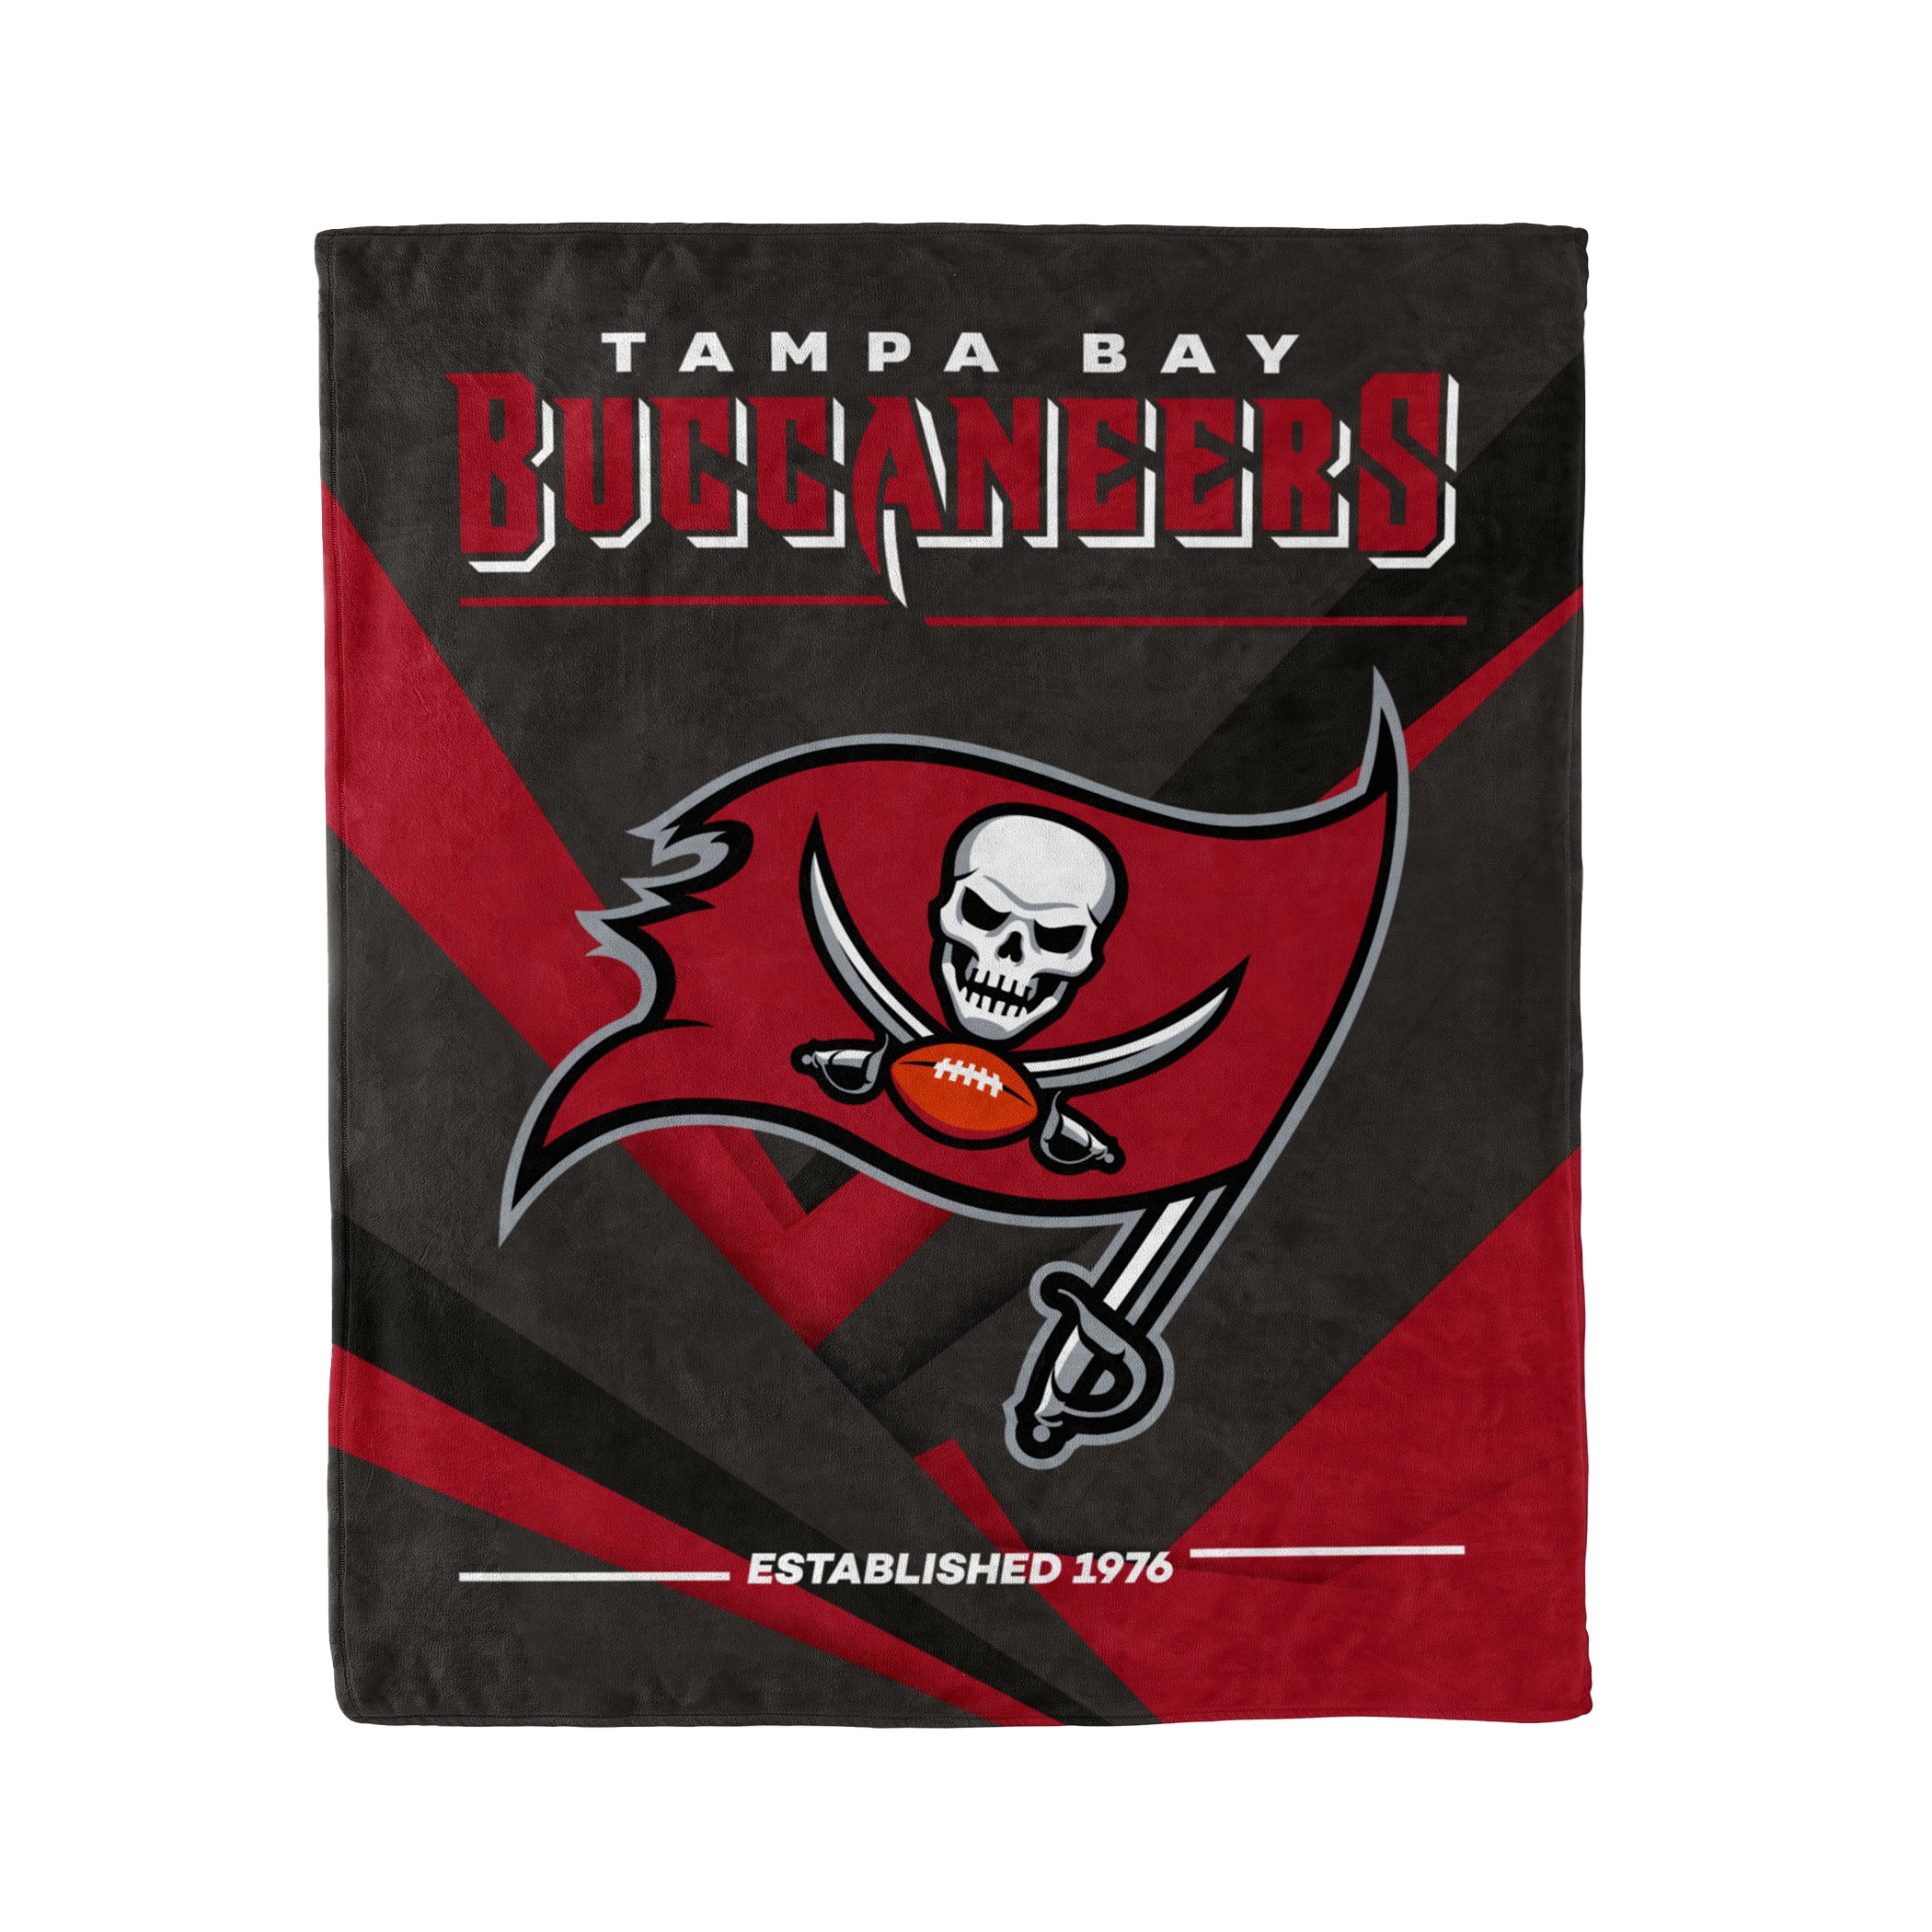 Game day poster No. 9, ft. the best - Tampa Bay Buccaneers